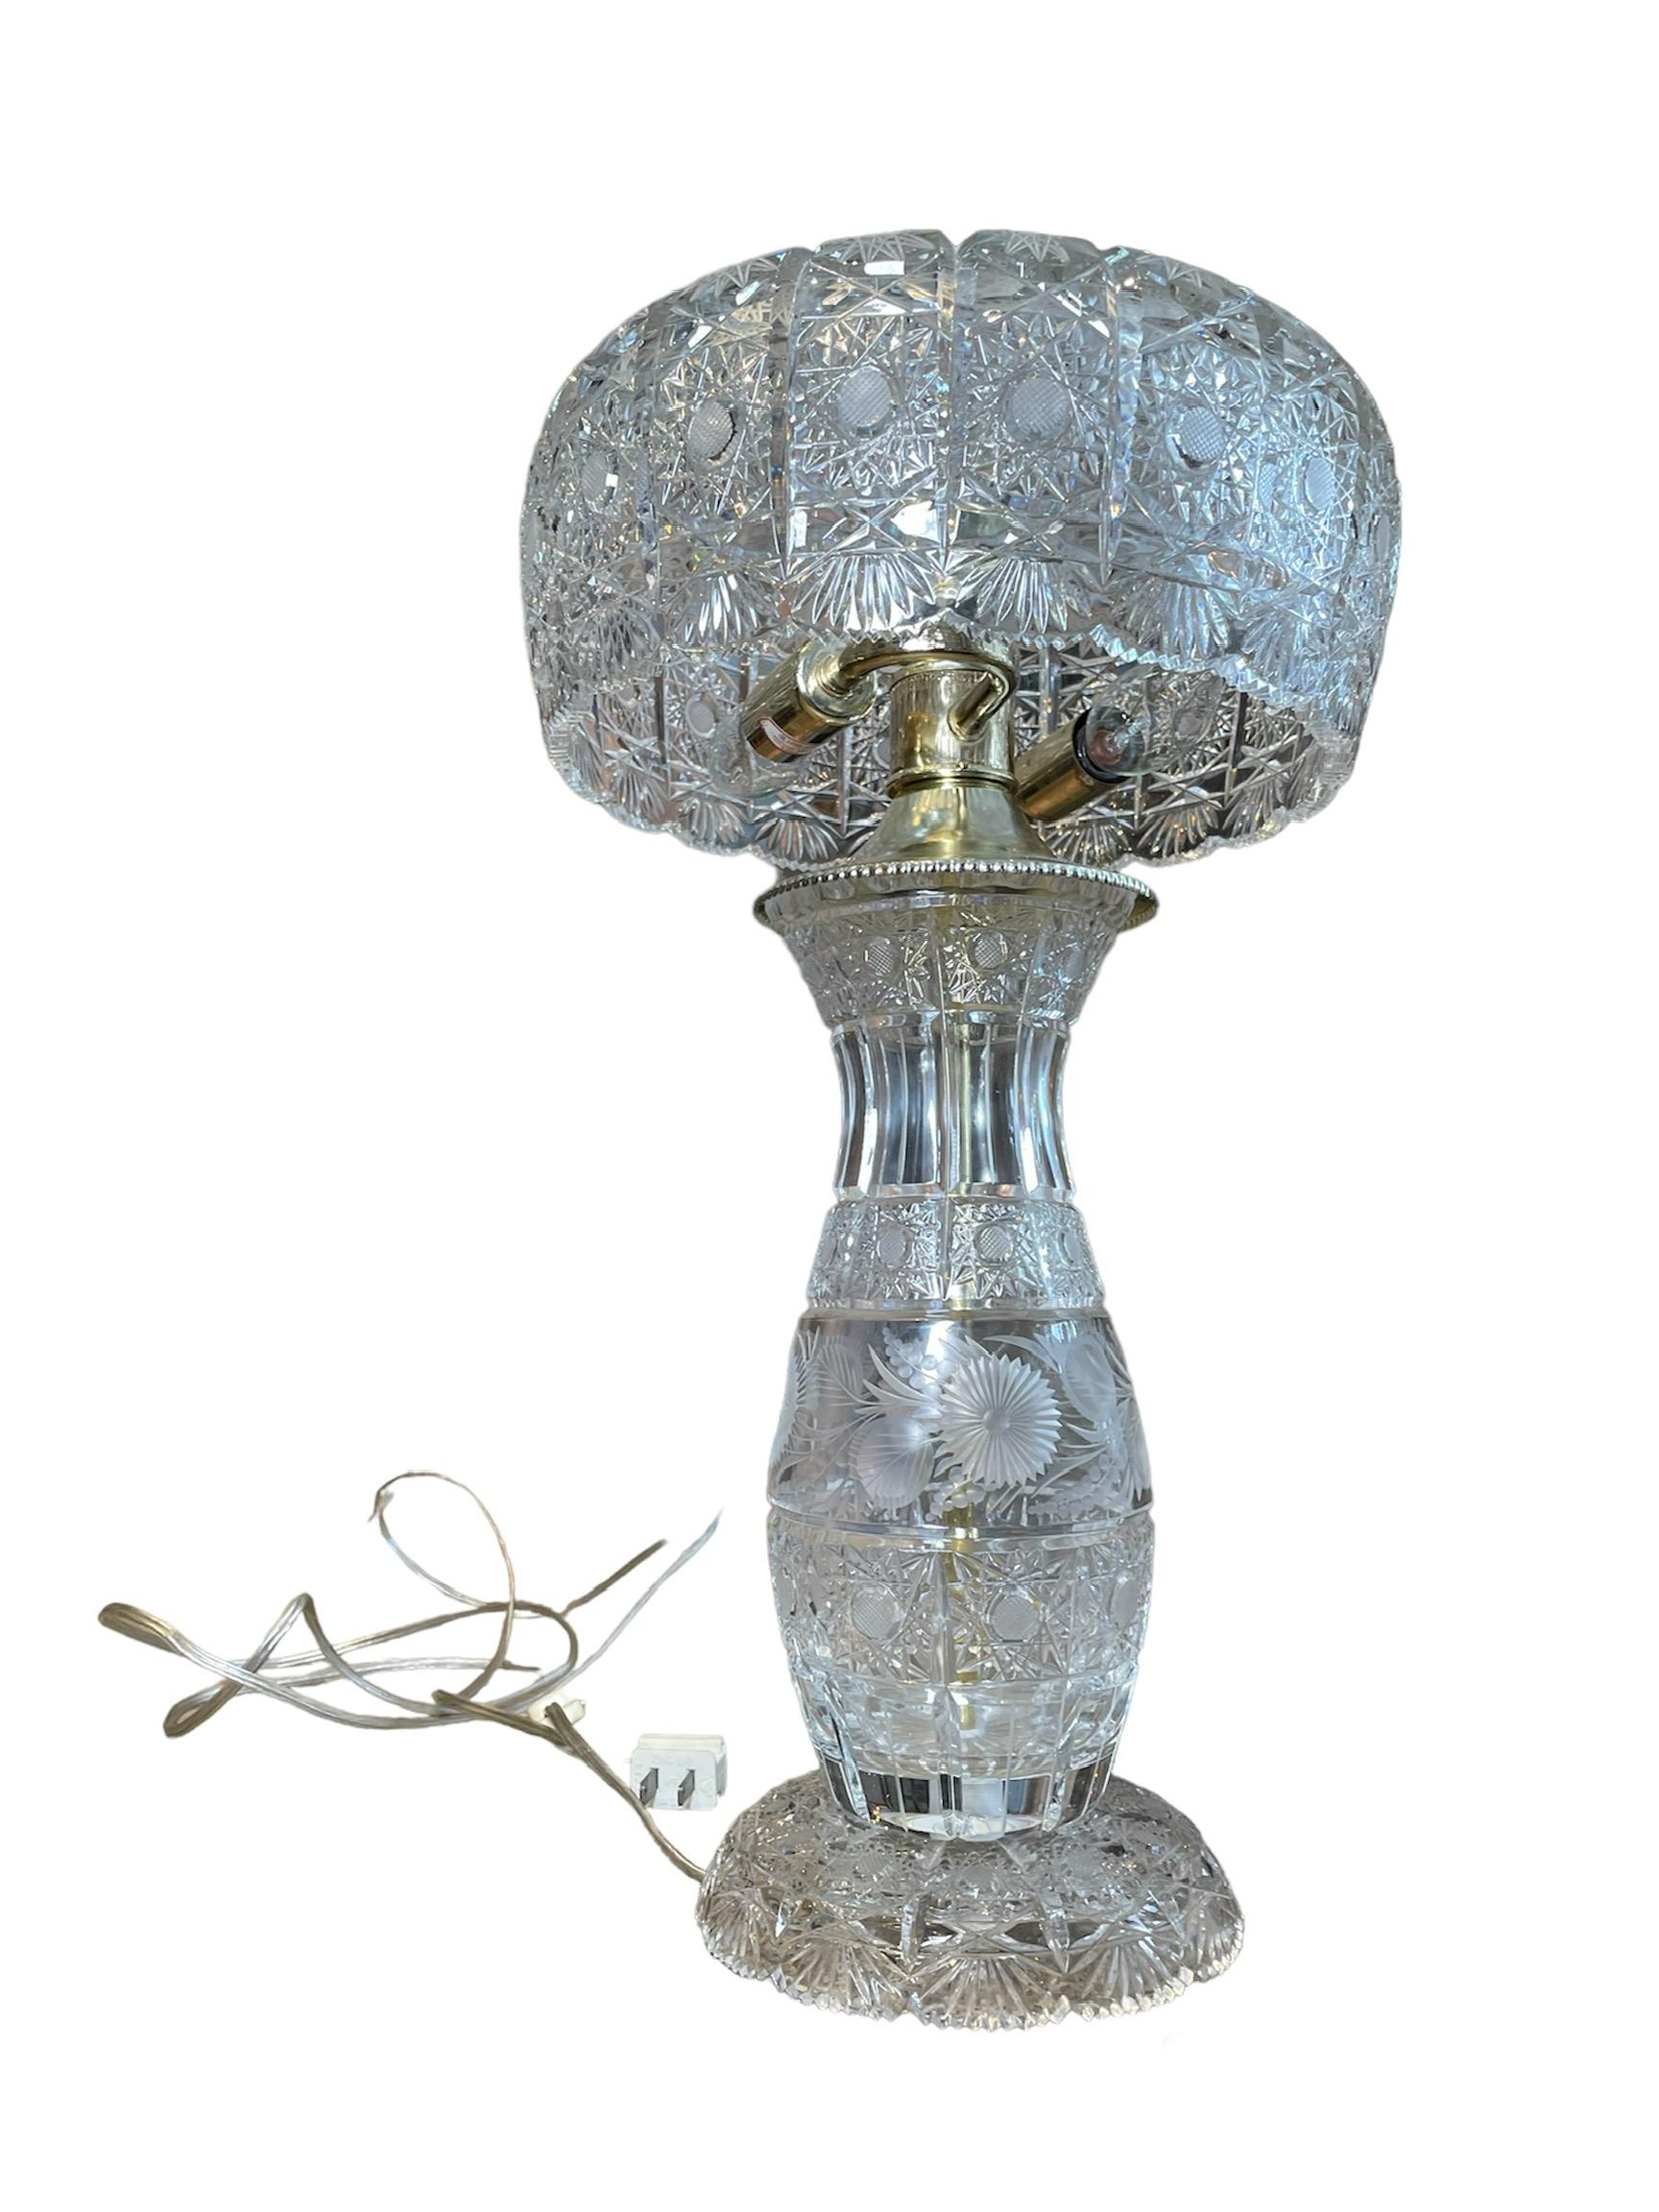 This is an American Cut Crystal Electrified Table Lamp. It depicts a round wide bowl shaped cut crystal shade supported by an also cut crystal urn shaped base/body. Both cut crystals depict a pattern of stars, starbursts and fans. The center of the